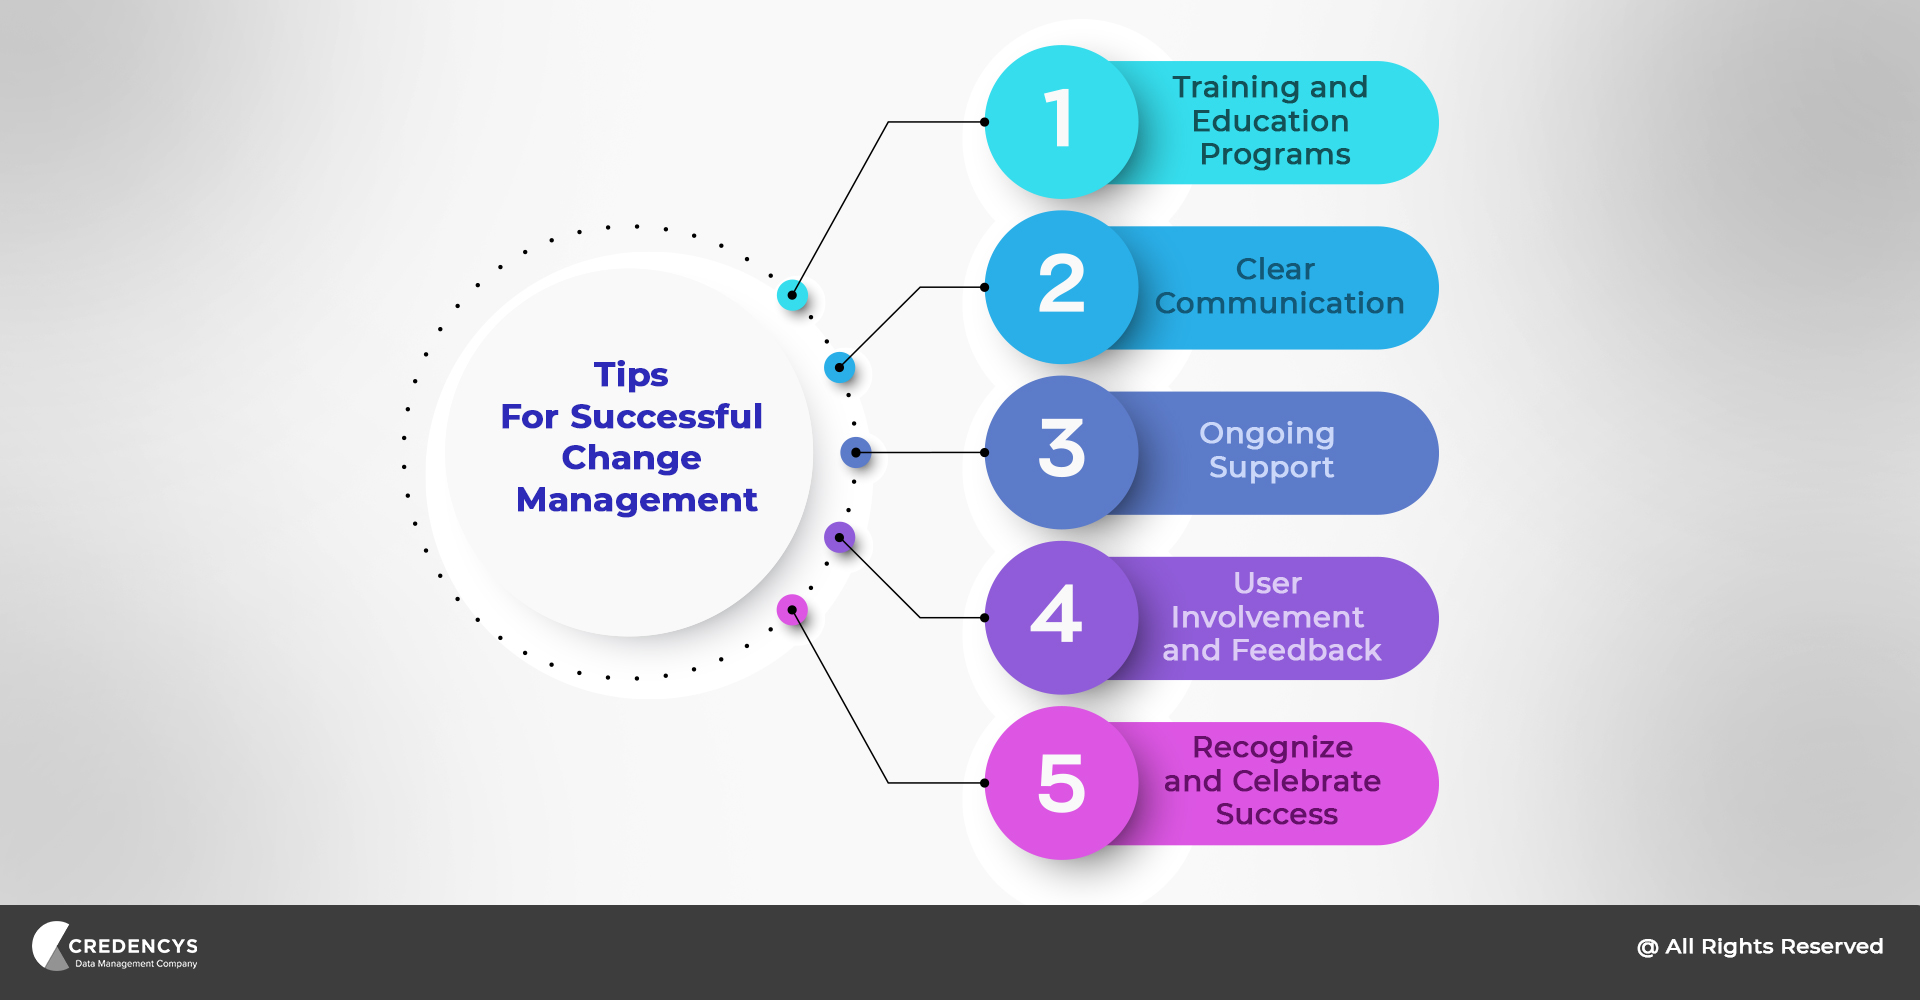 Tips for Successful Change Management